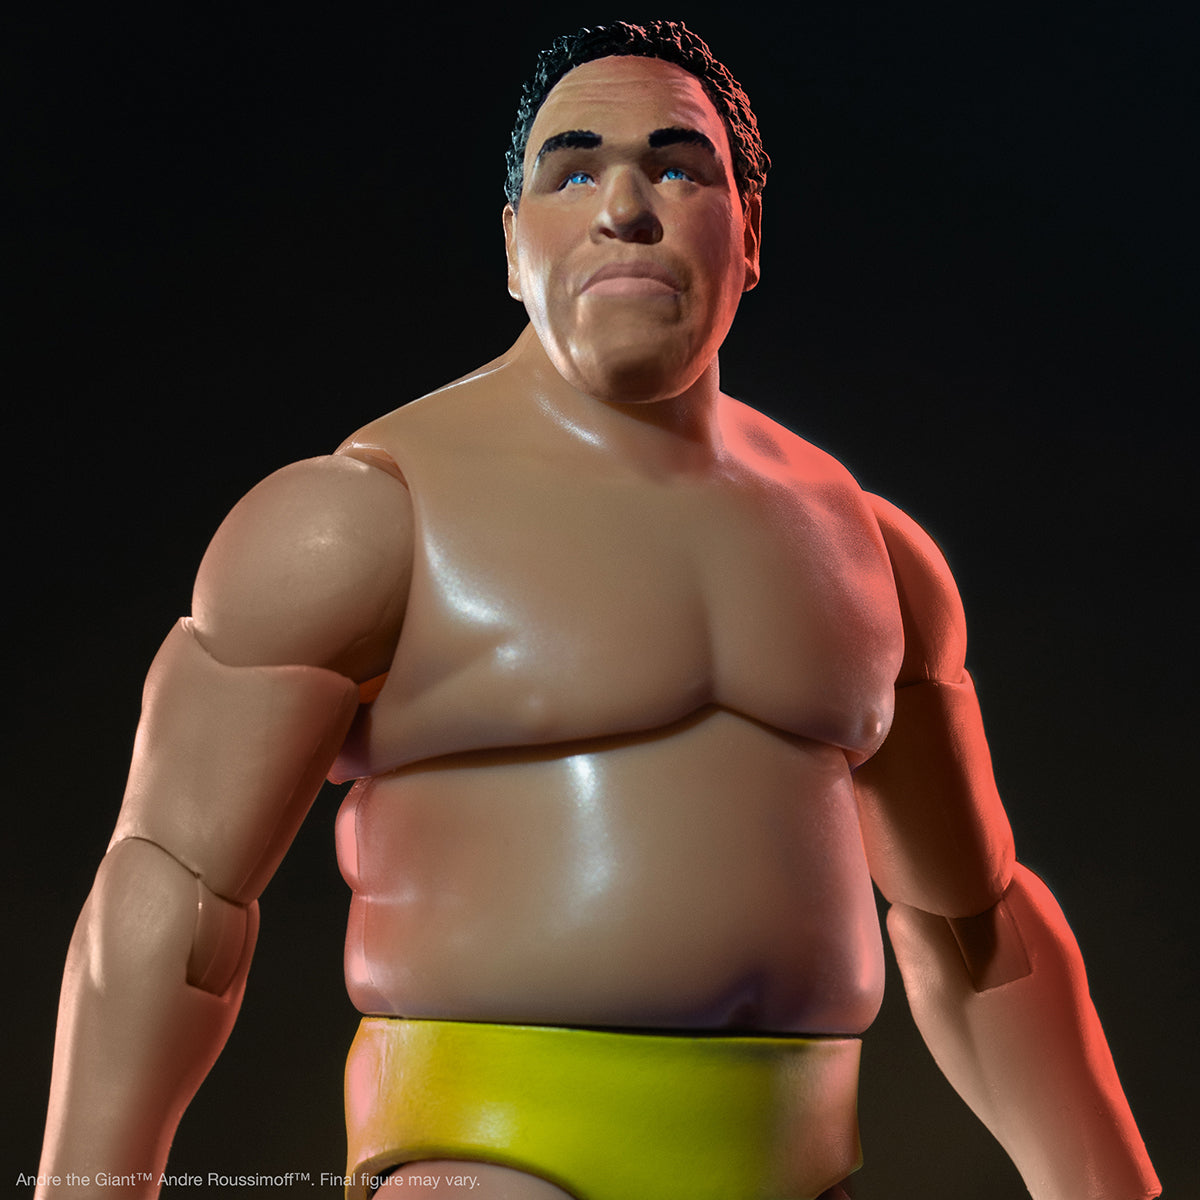 ANDRE THE GIANT ULTIMATES